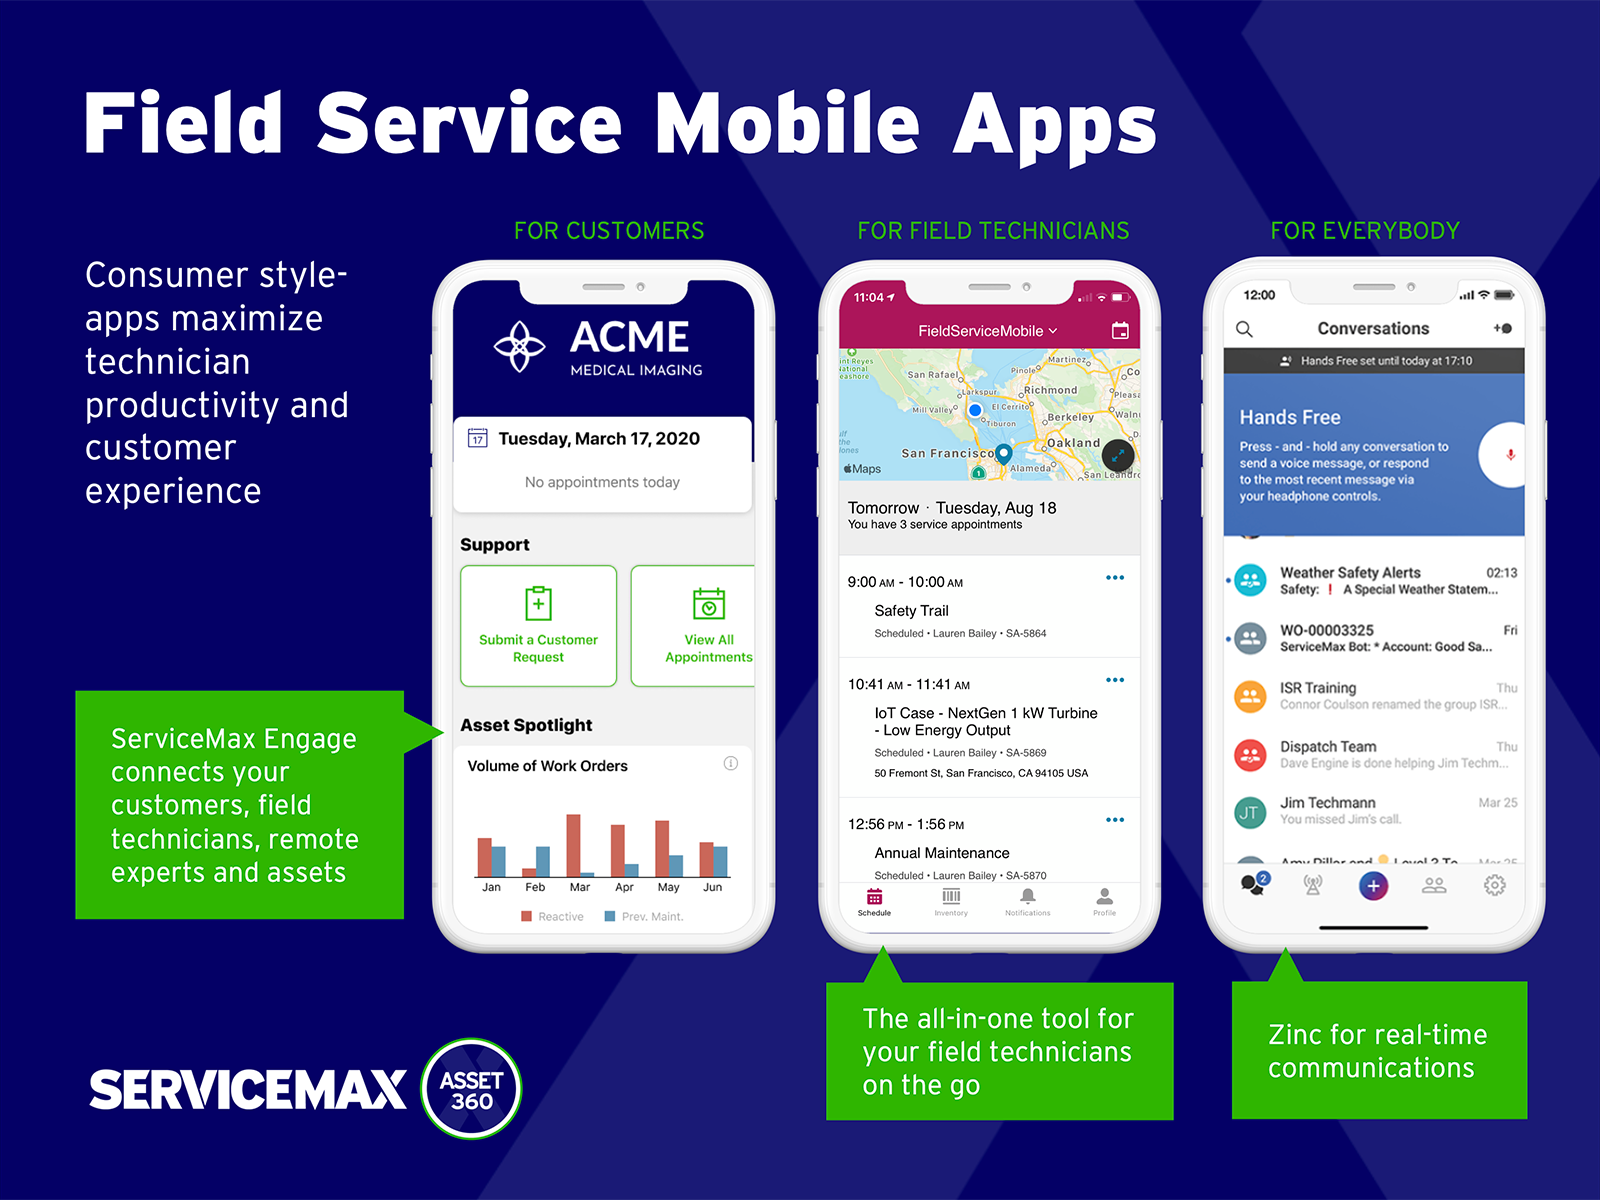 ServiceMax Software - The Salesforce Mobile Field Service App for Android and iOS is an all-in-one tool for field service technicians on the go. This enterprise-class mobile experience leverages Salesforce in a lightweight design optimized for a modern mobile workforce.